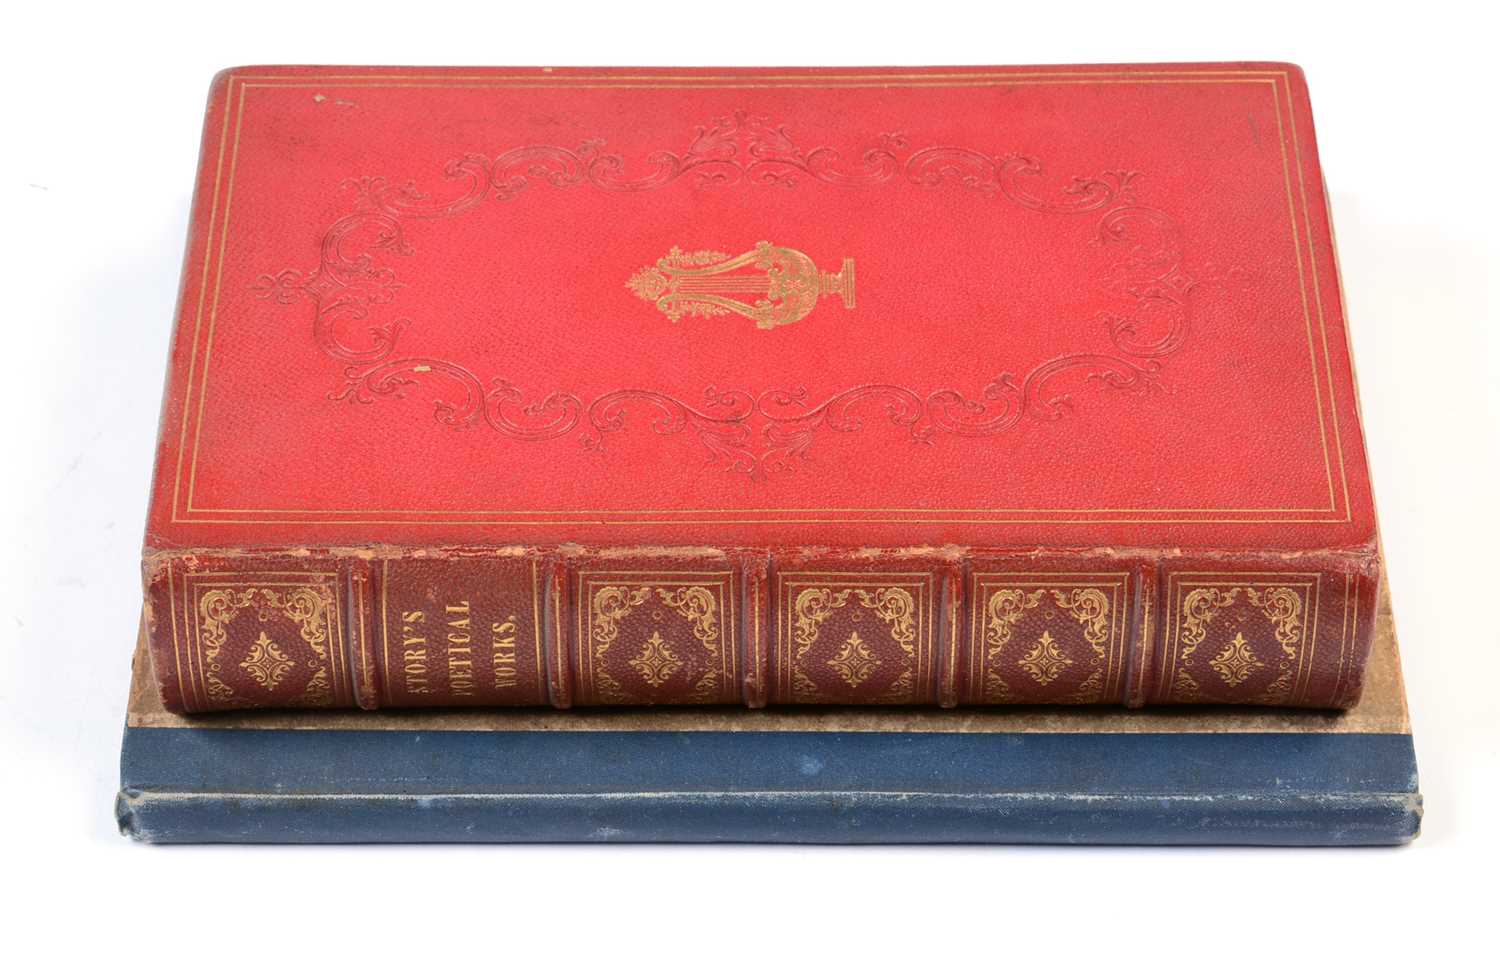 Lot 788 - Two Northern Poetical Works